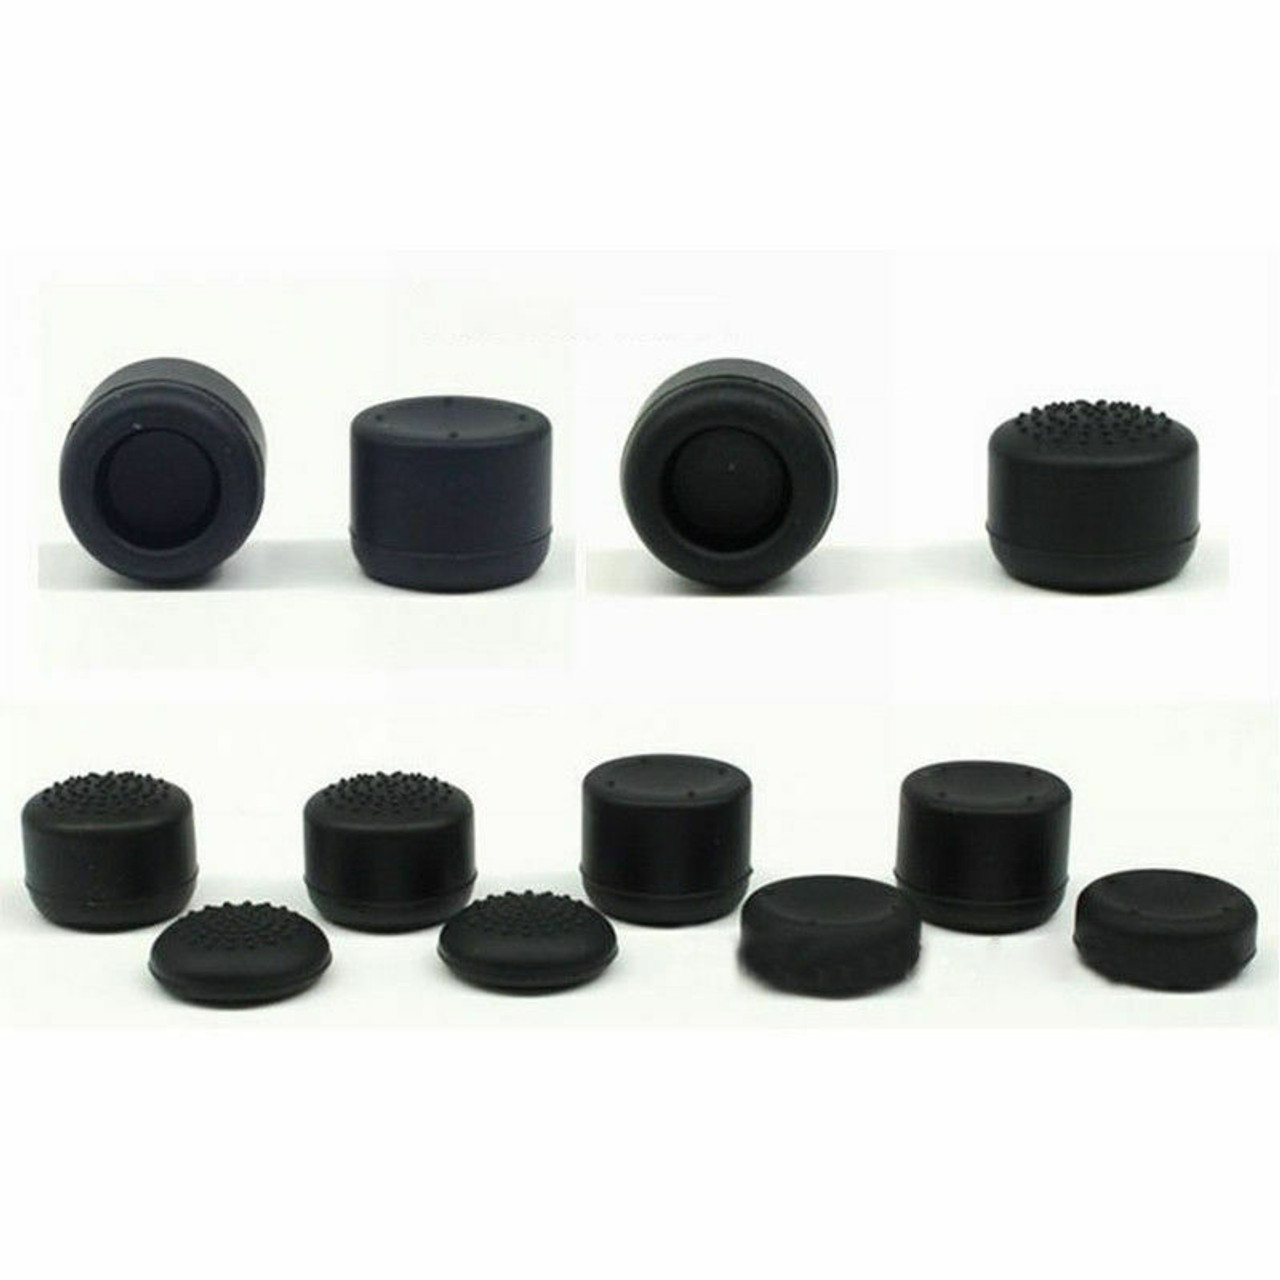 8Pcs Black Silicone Thumb Stick Grip Cover Caps For PS4 & Xbox One Controller US